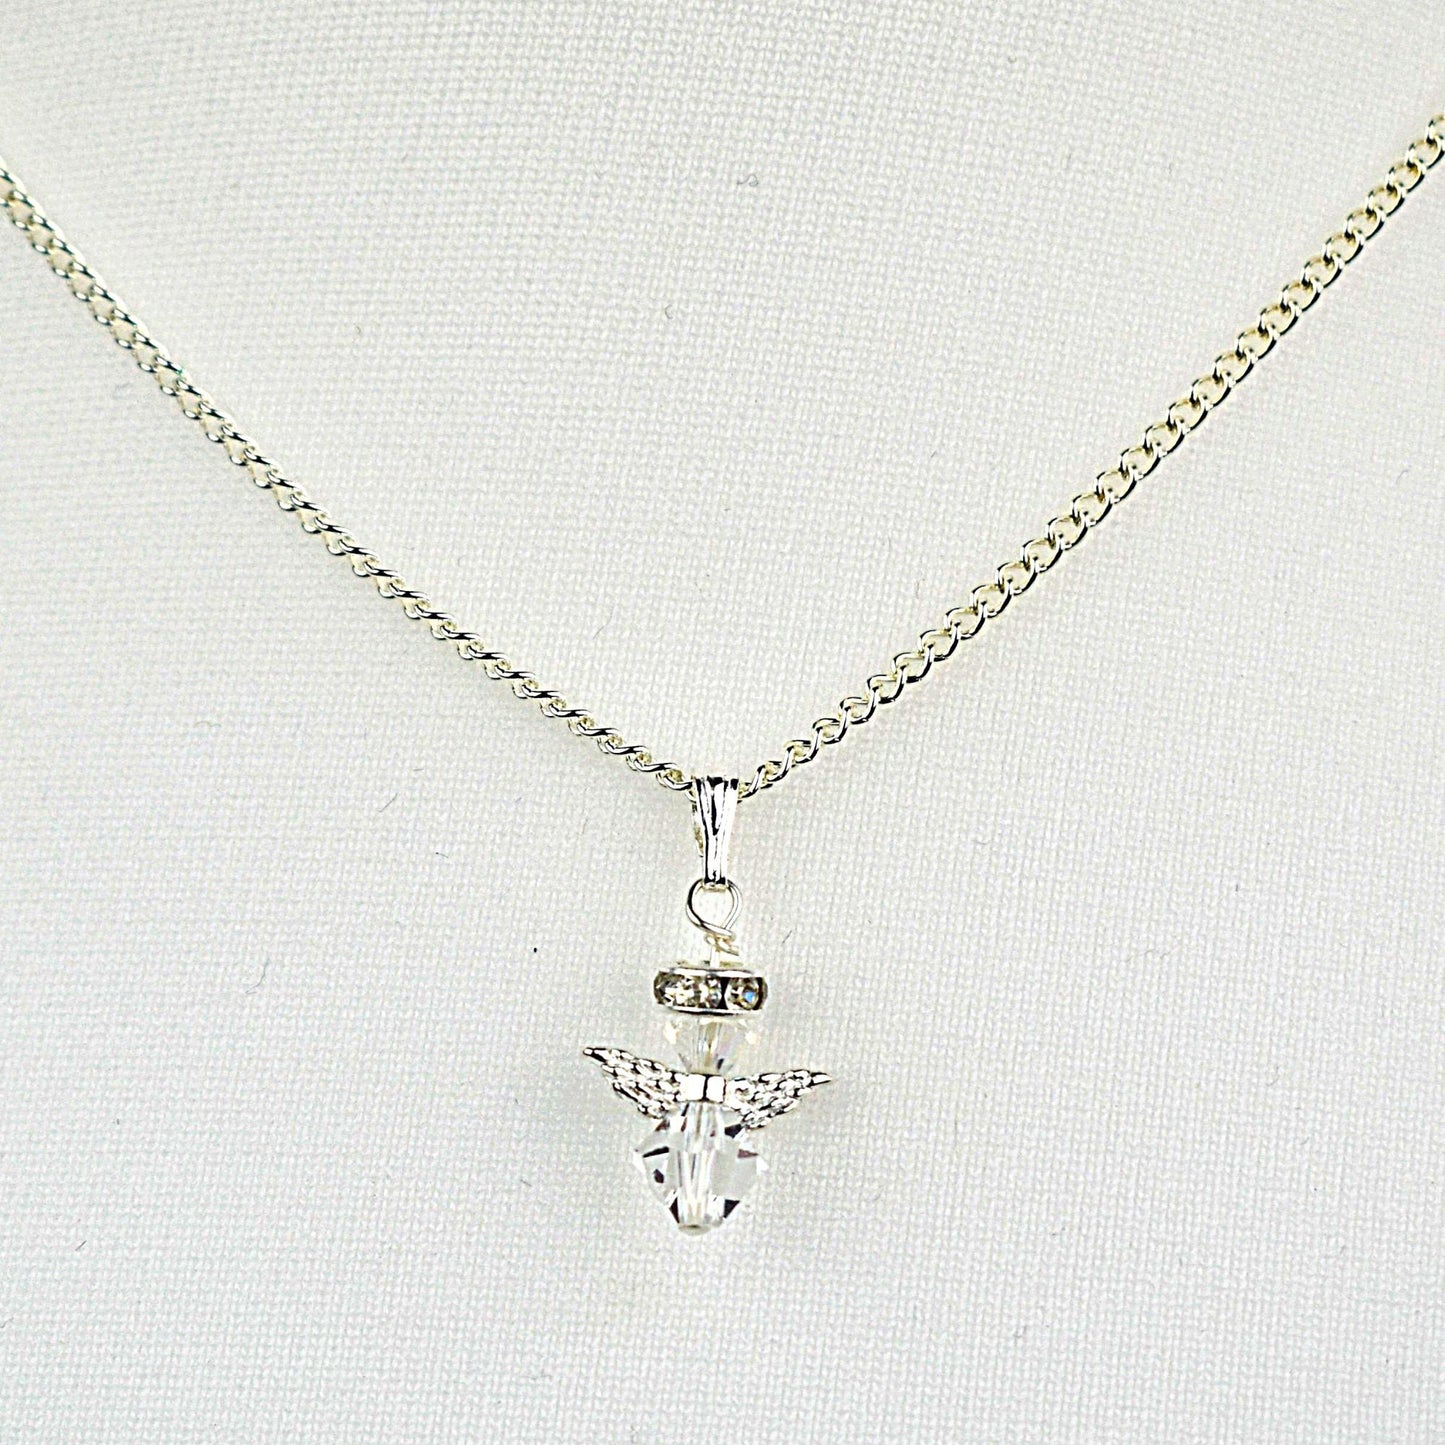 Snow angel Christmas pendant and earrings shown in clear and rose crystal. Necklace has an 18" silver plated chain while earrings are hung from sterling silver wires.